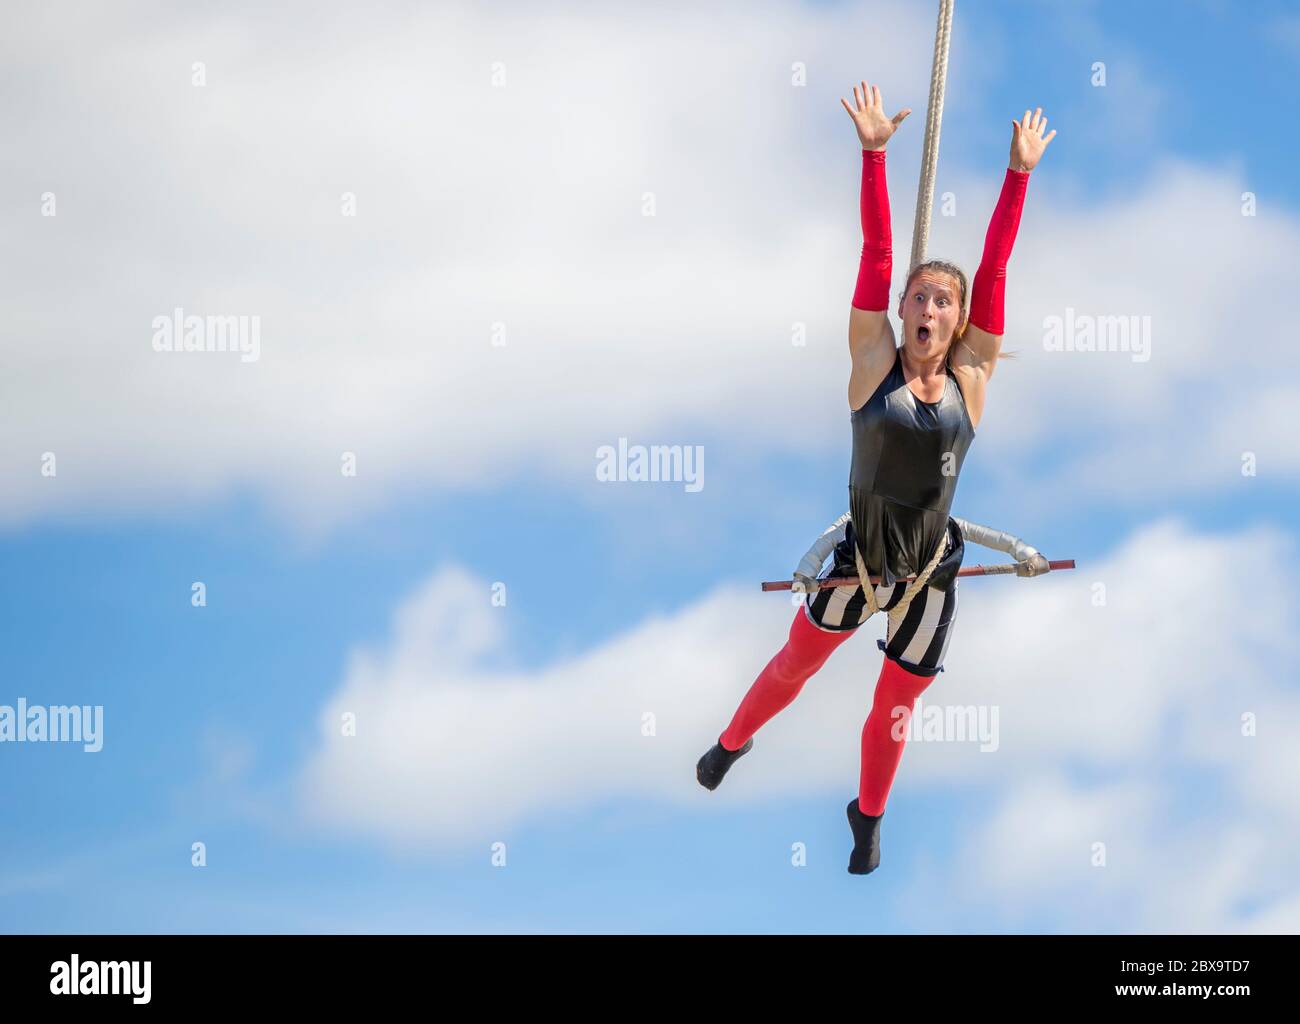 Saint John, New Brunswick, Canada - September 4, 2015: An acrobat performs at the Saint John Exhibition. She is high up on a trapeze. Stock Photo